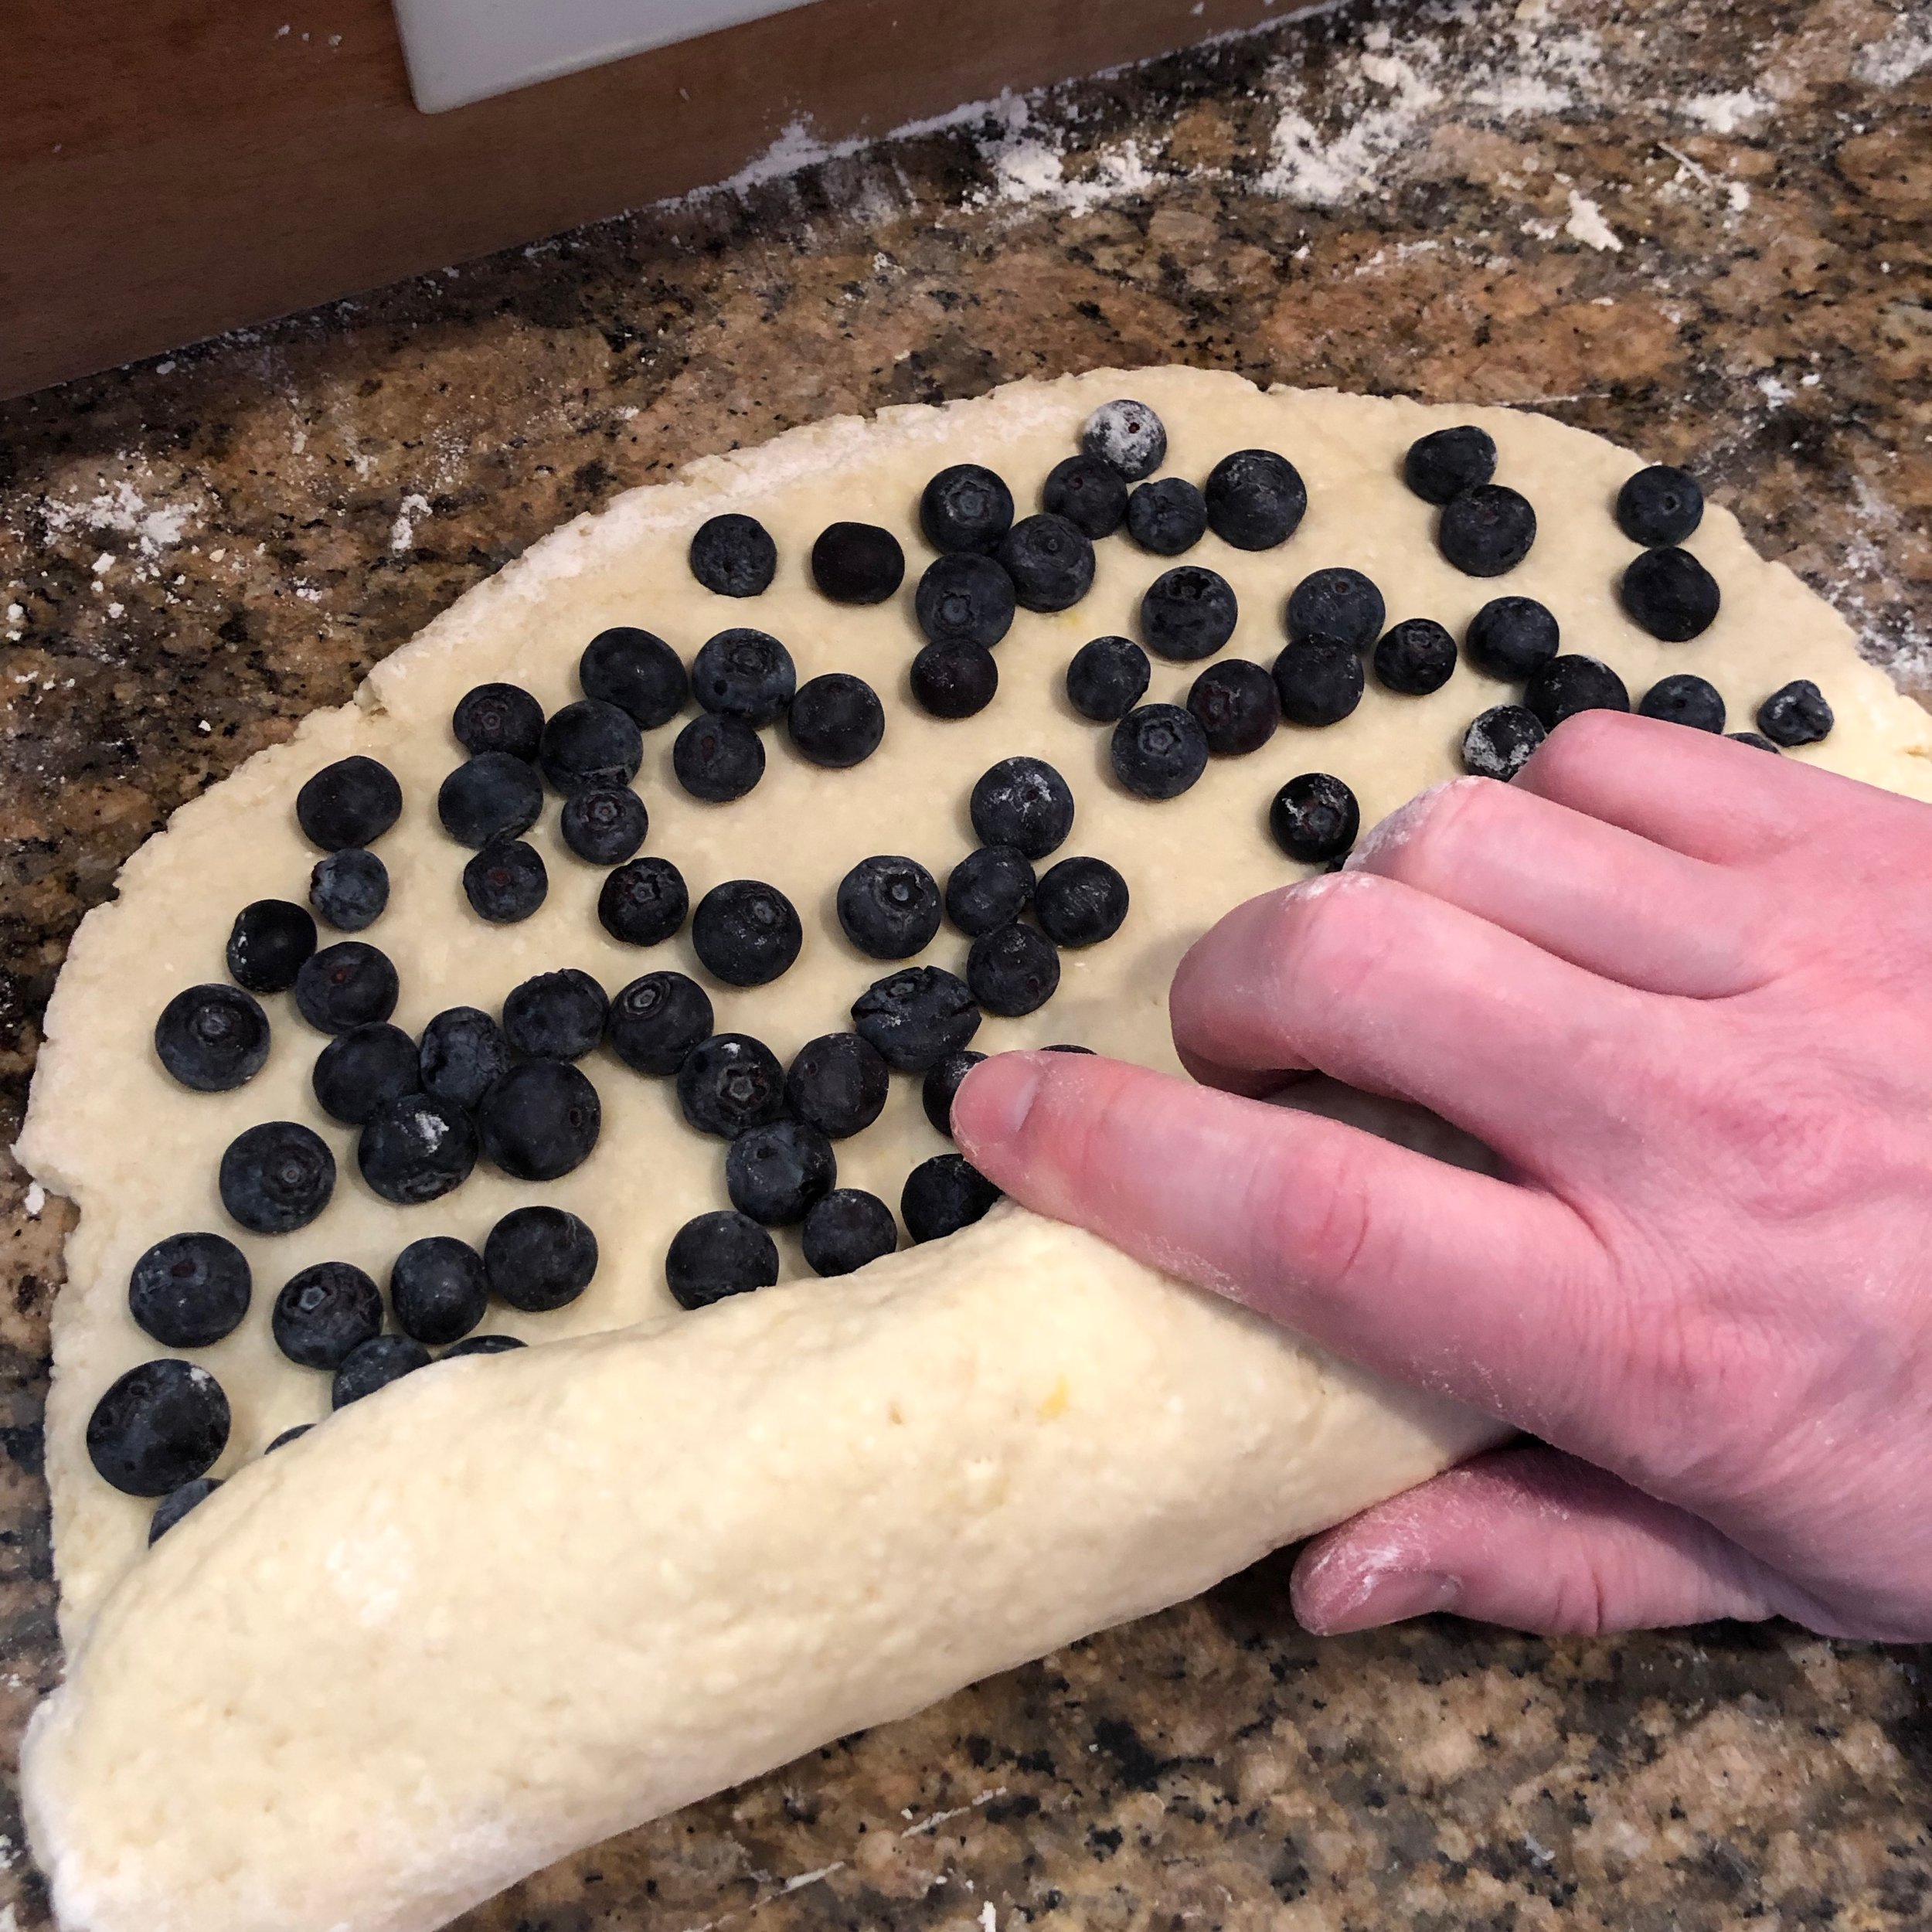  Rolling the blueberries into a tight log. 